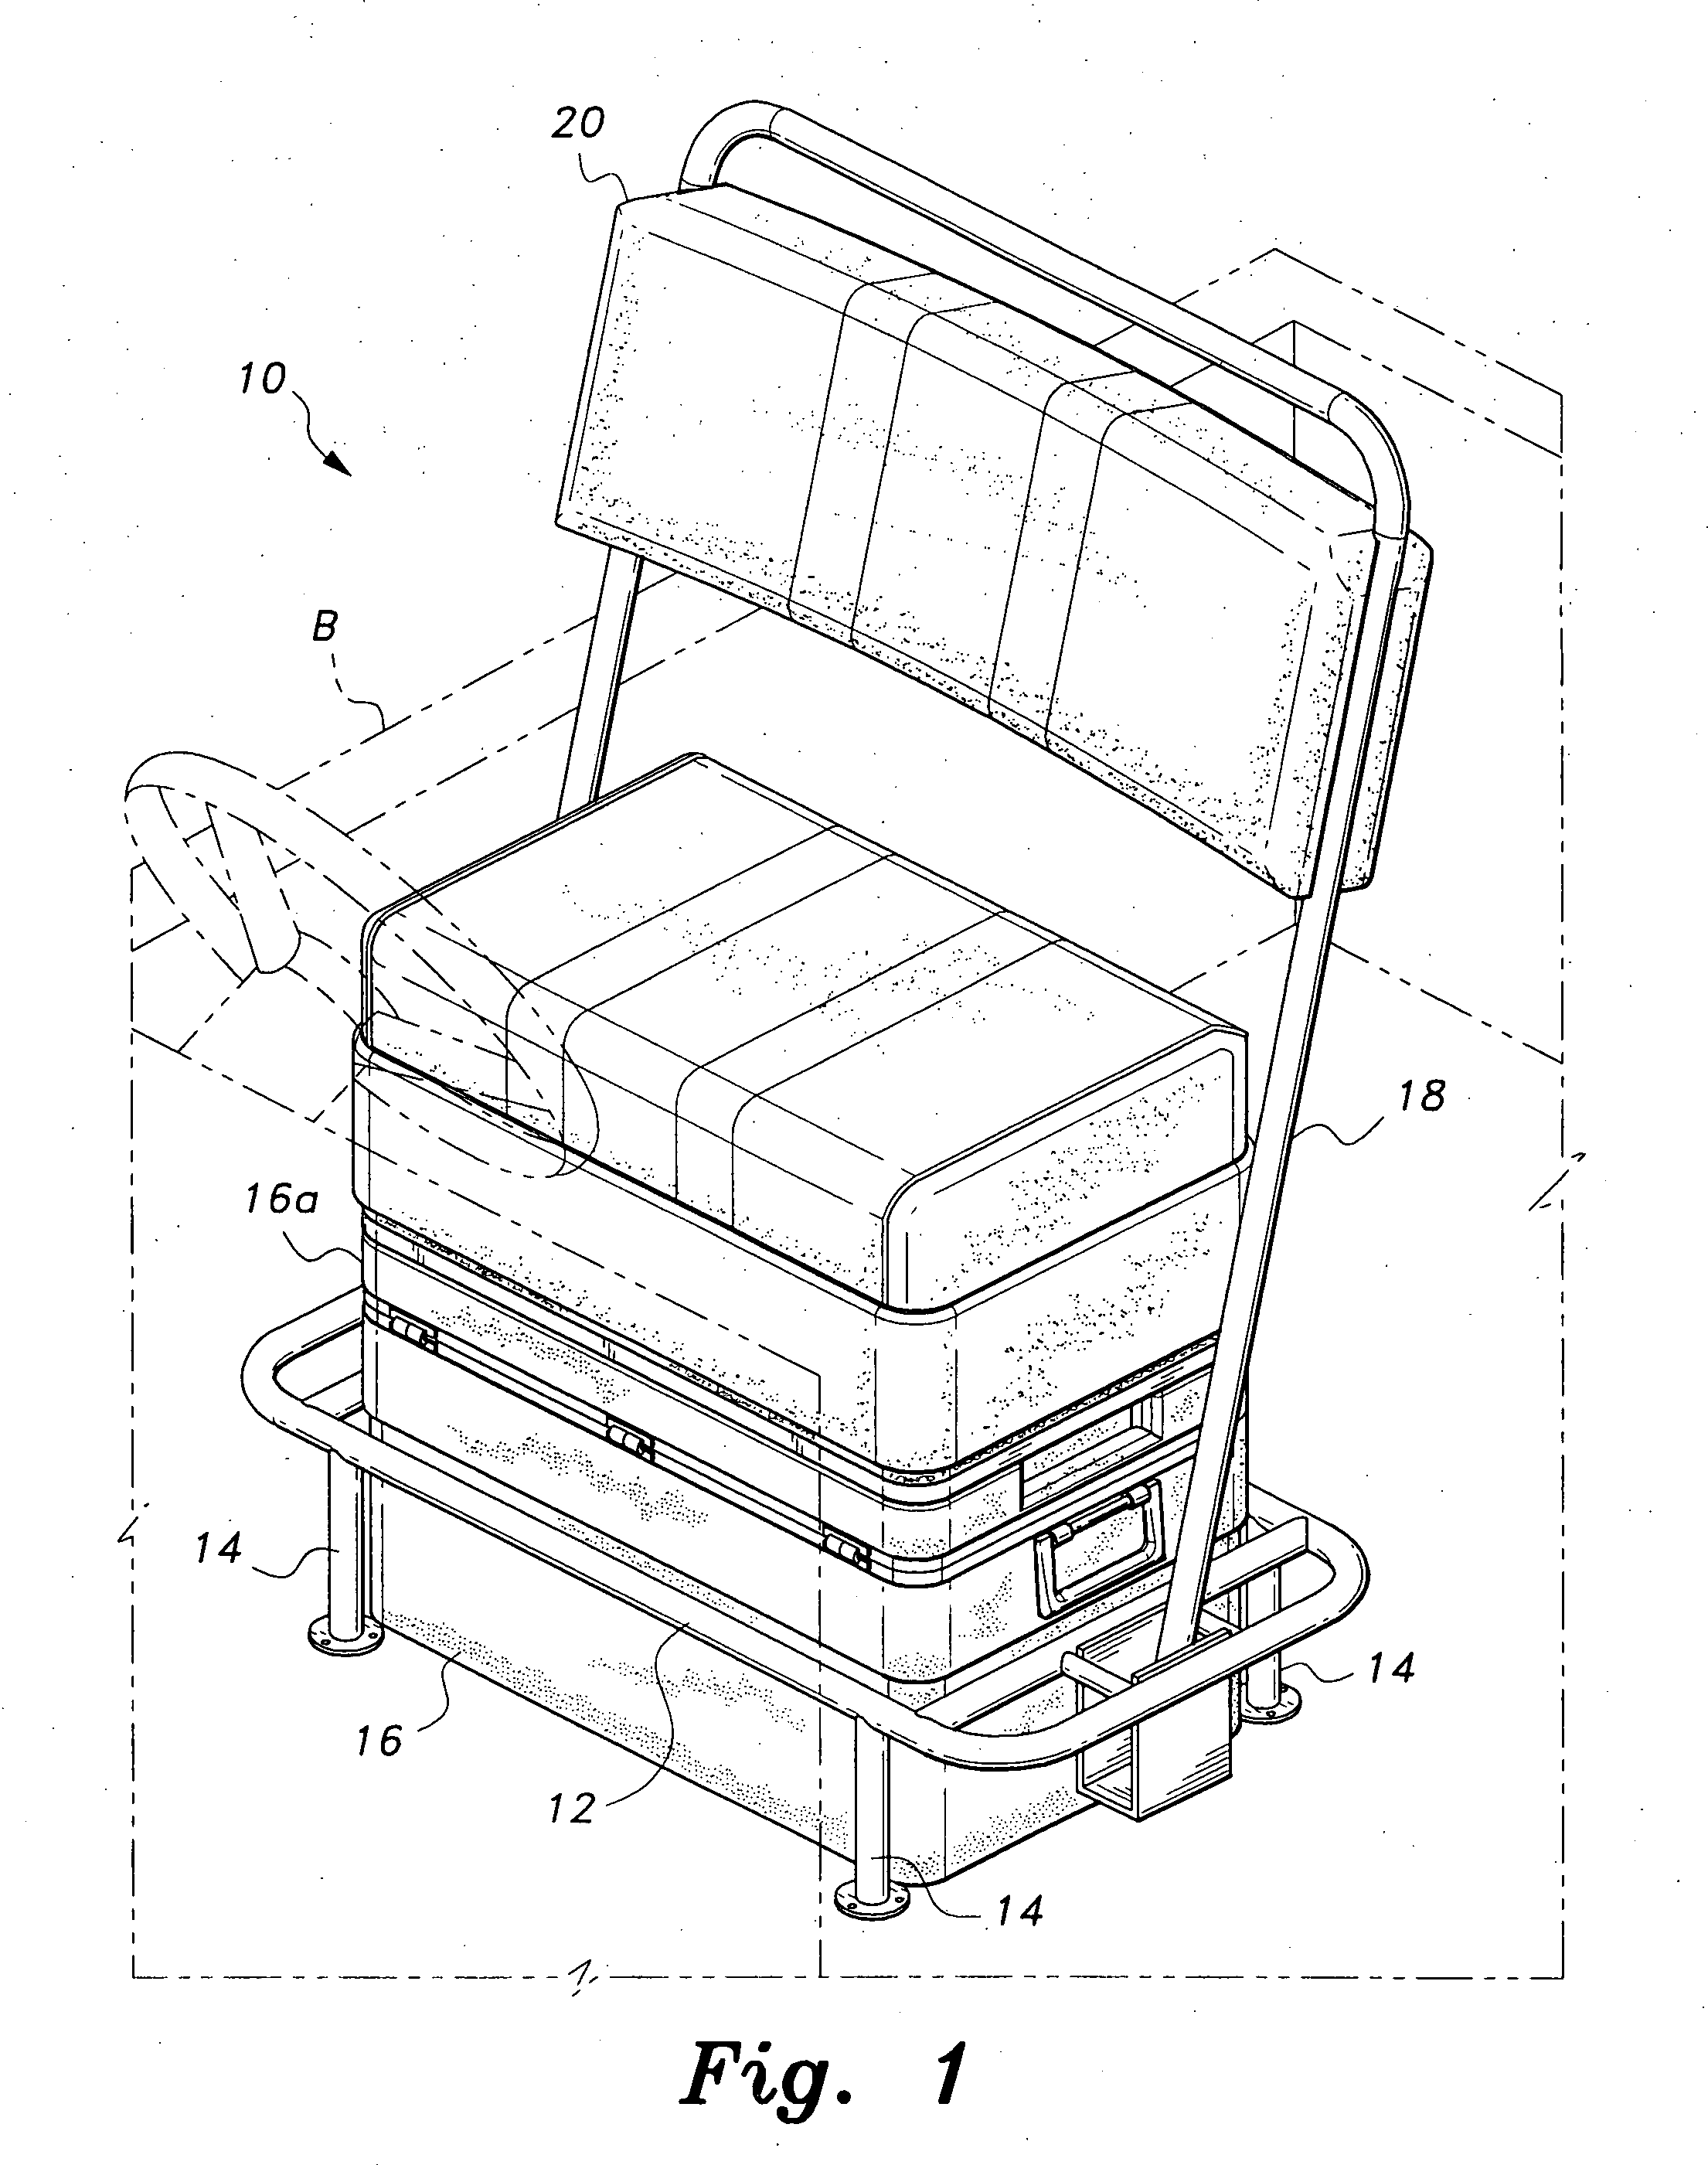 Combination cooler and seat system